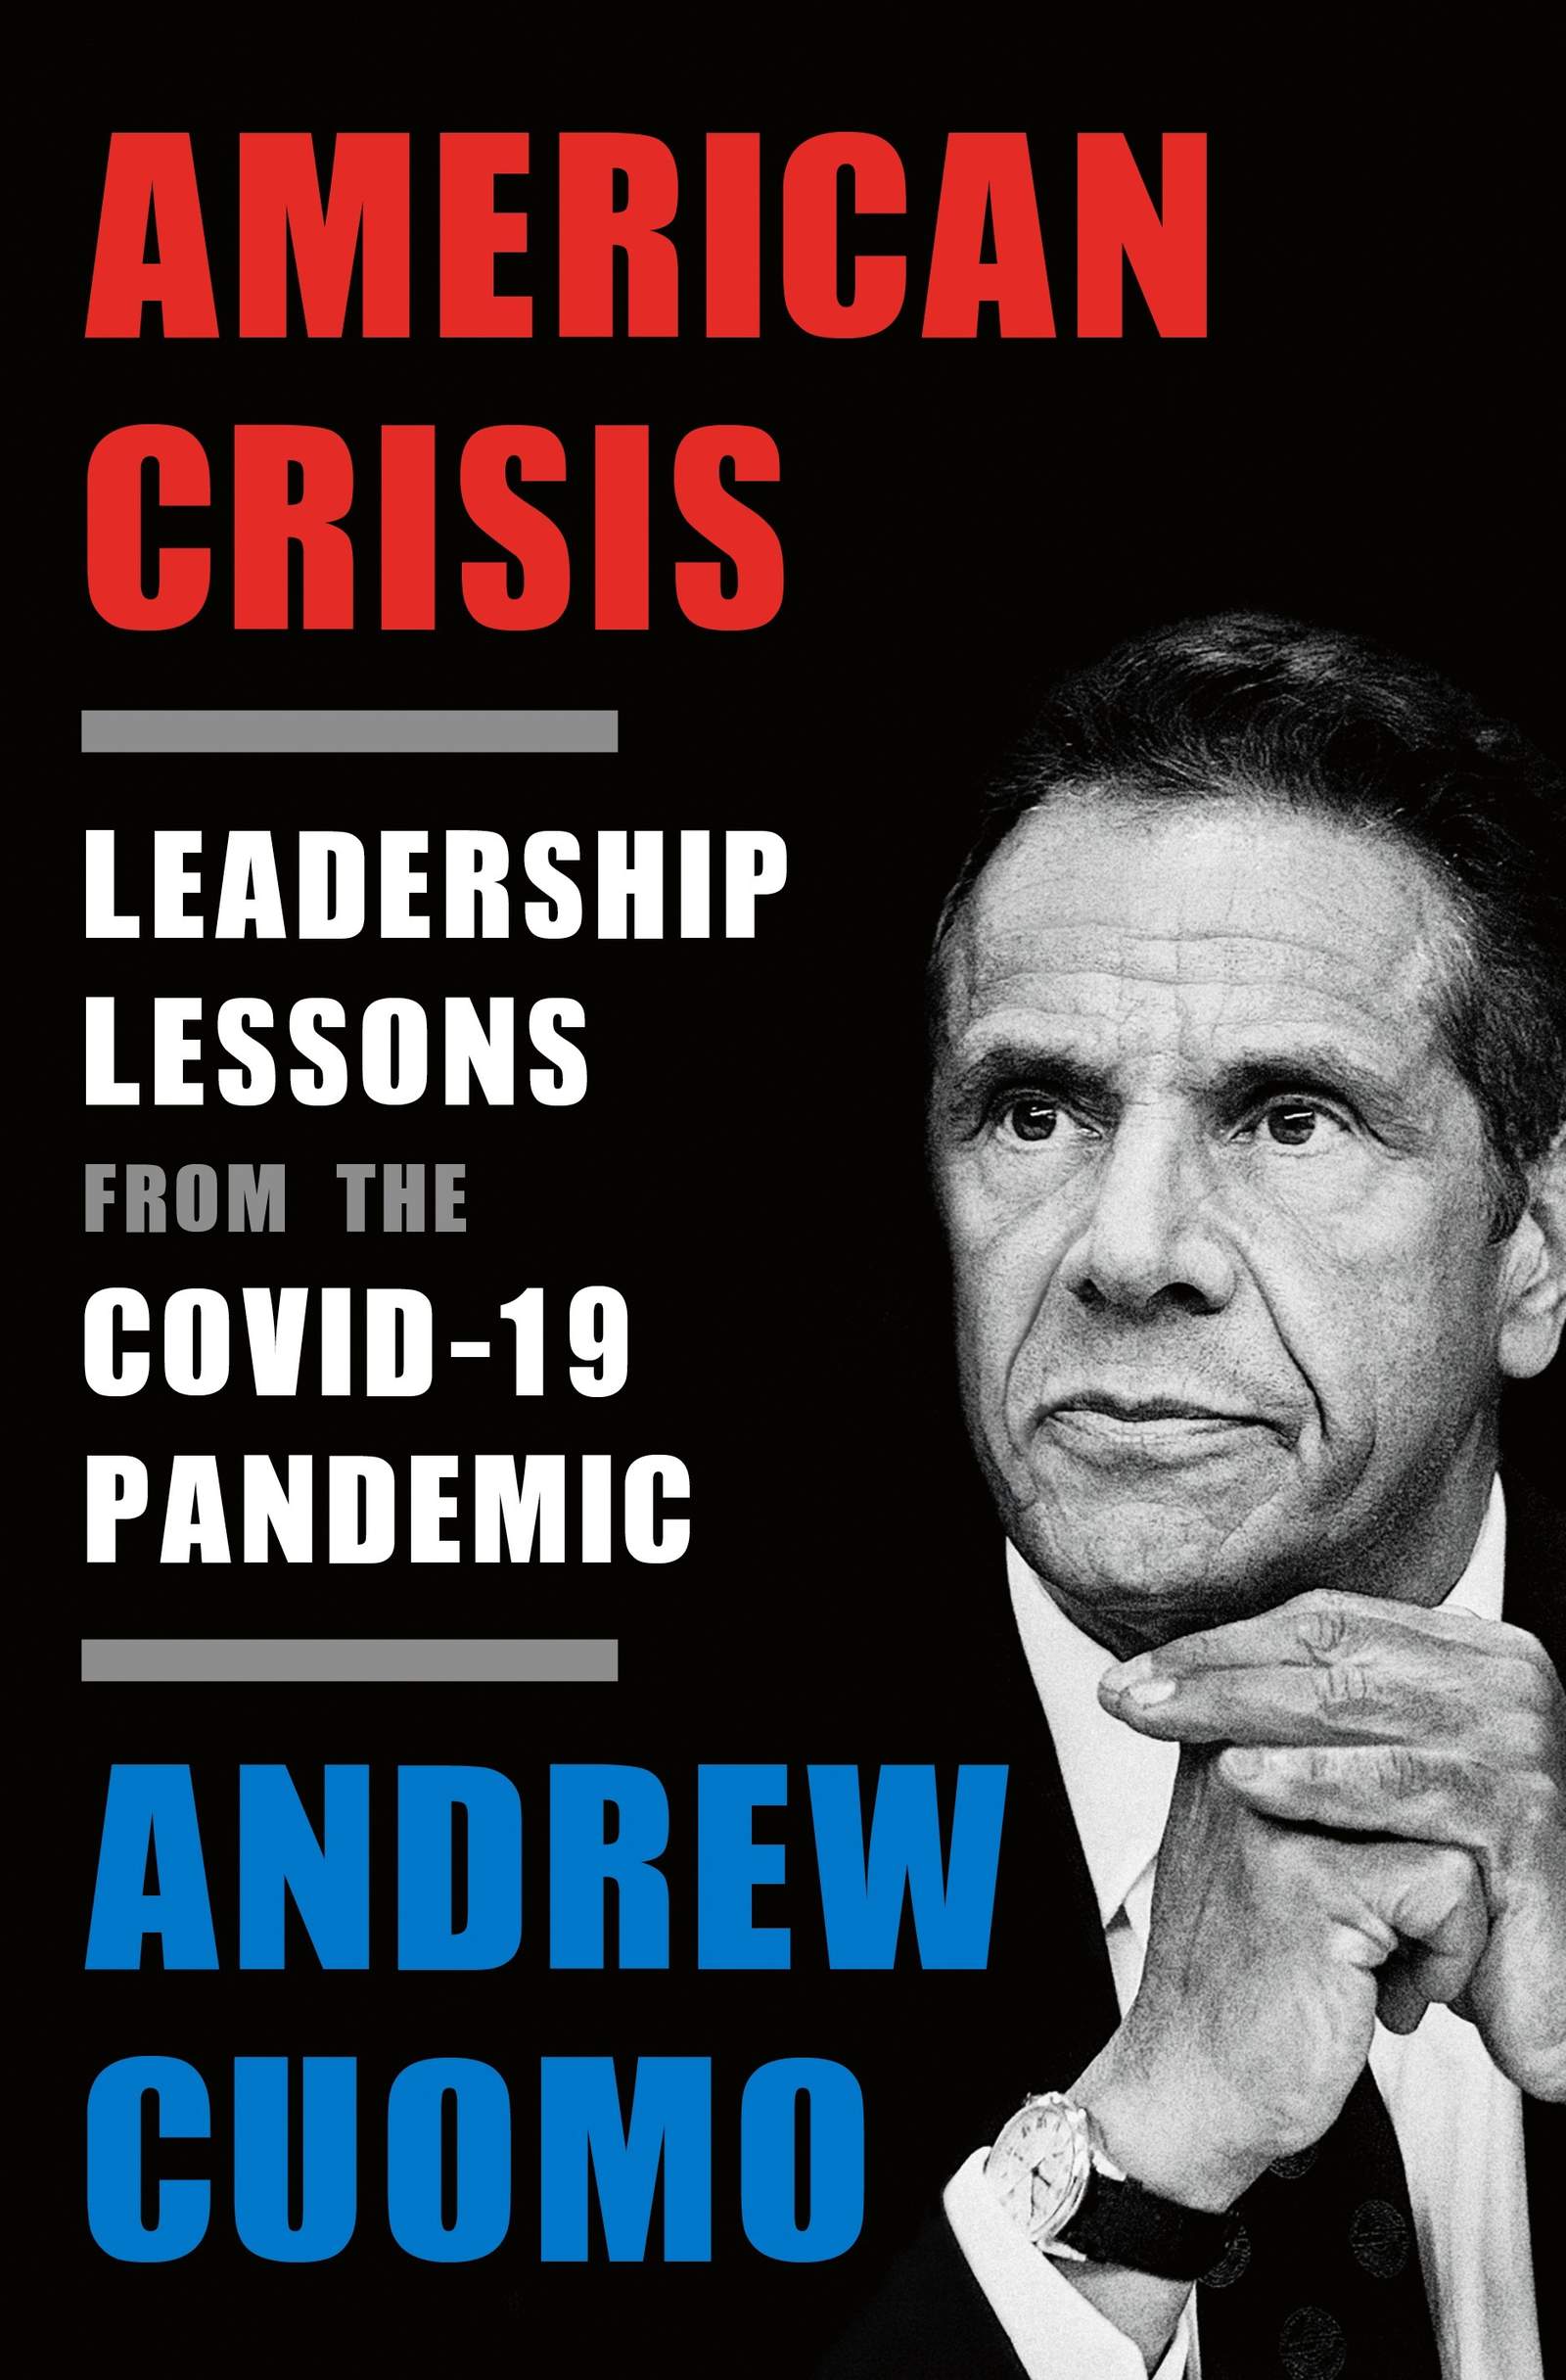 Gov. Andrew Cuomo book on COVID-19 response out in October